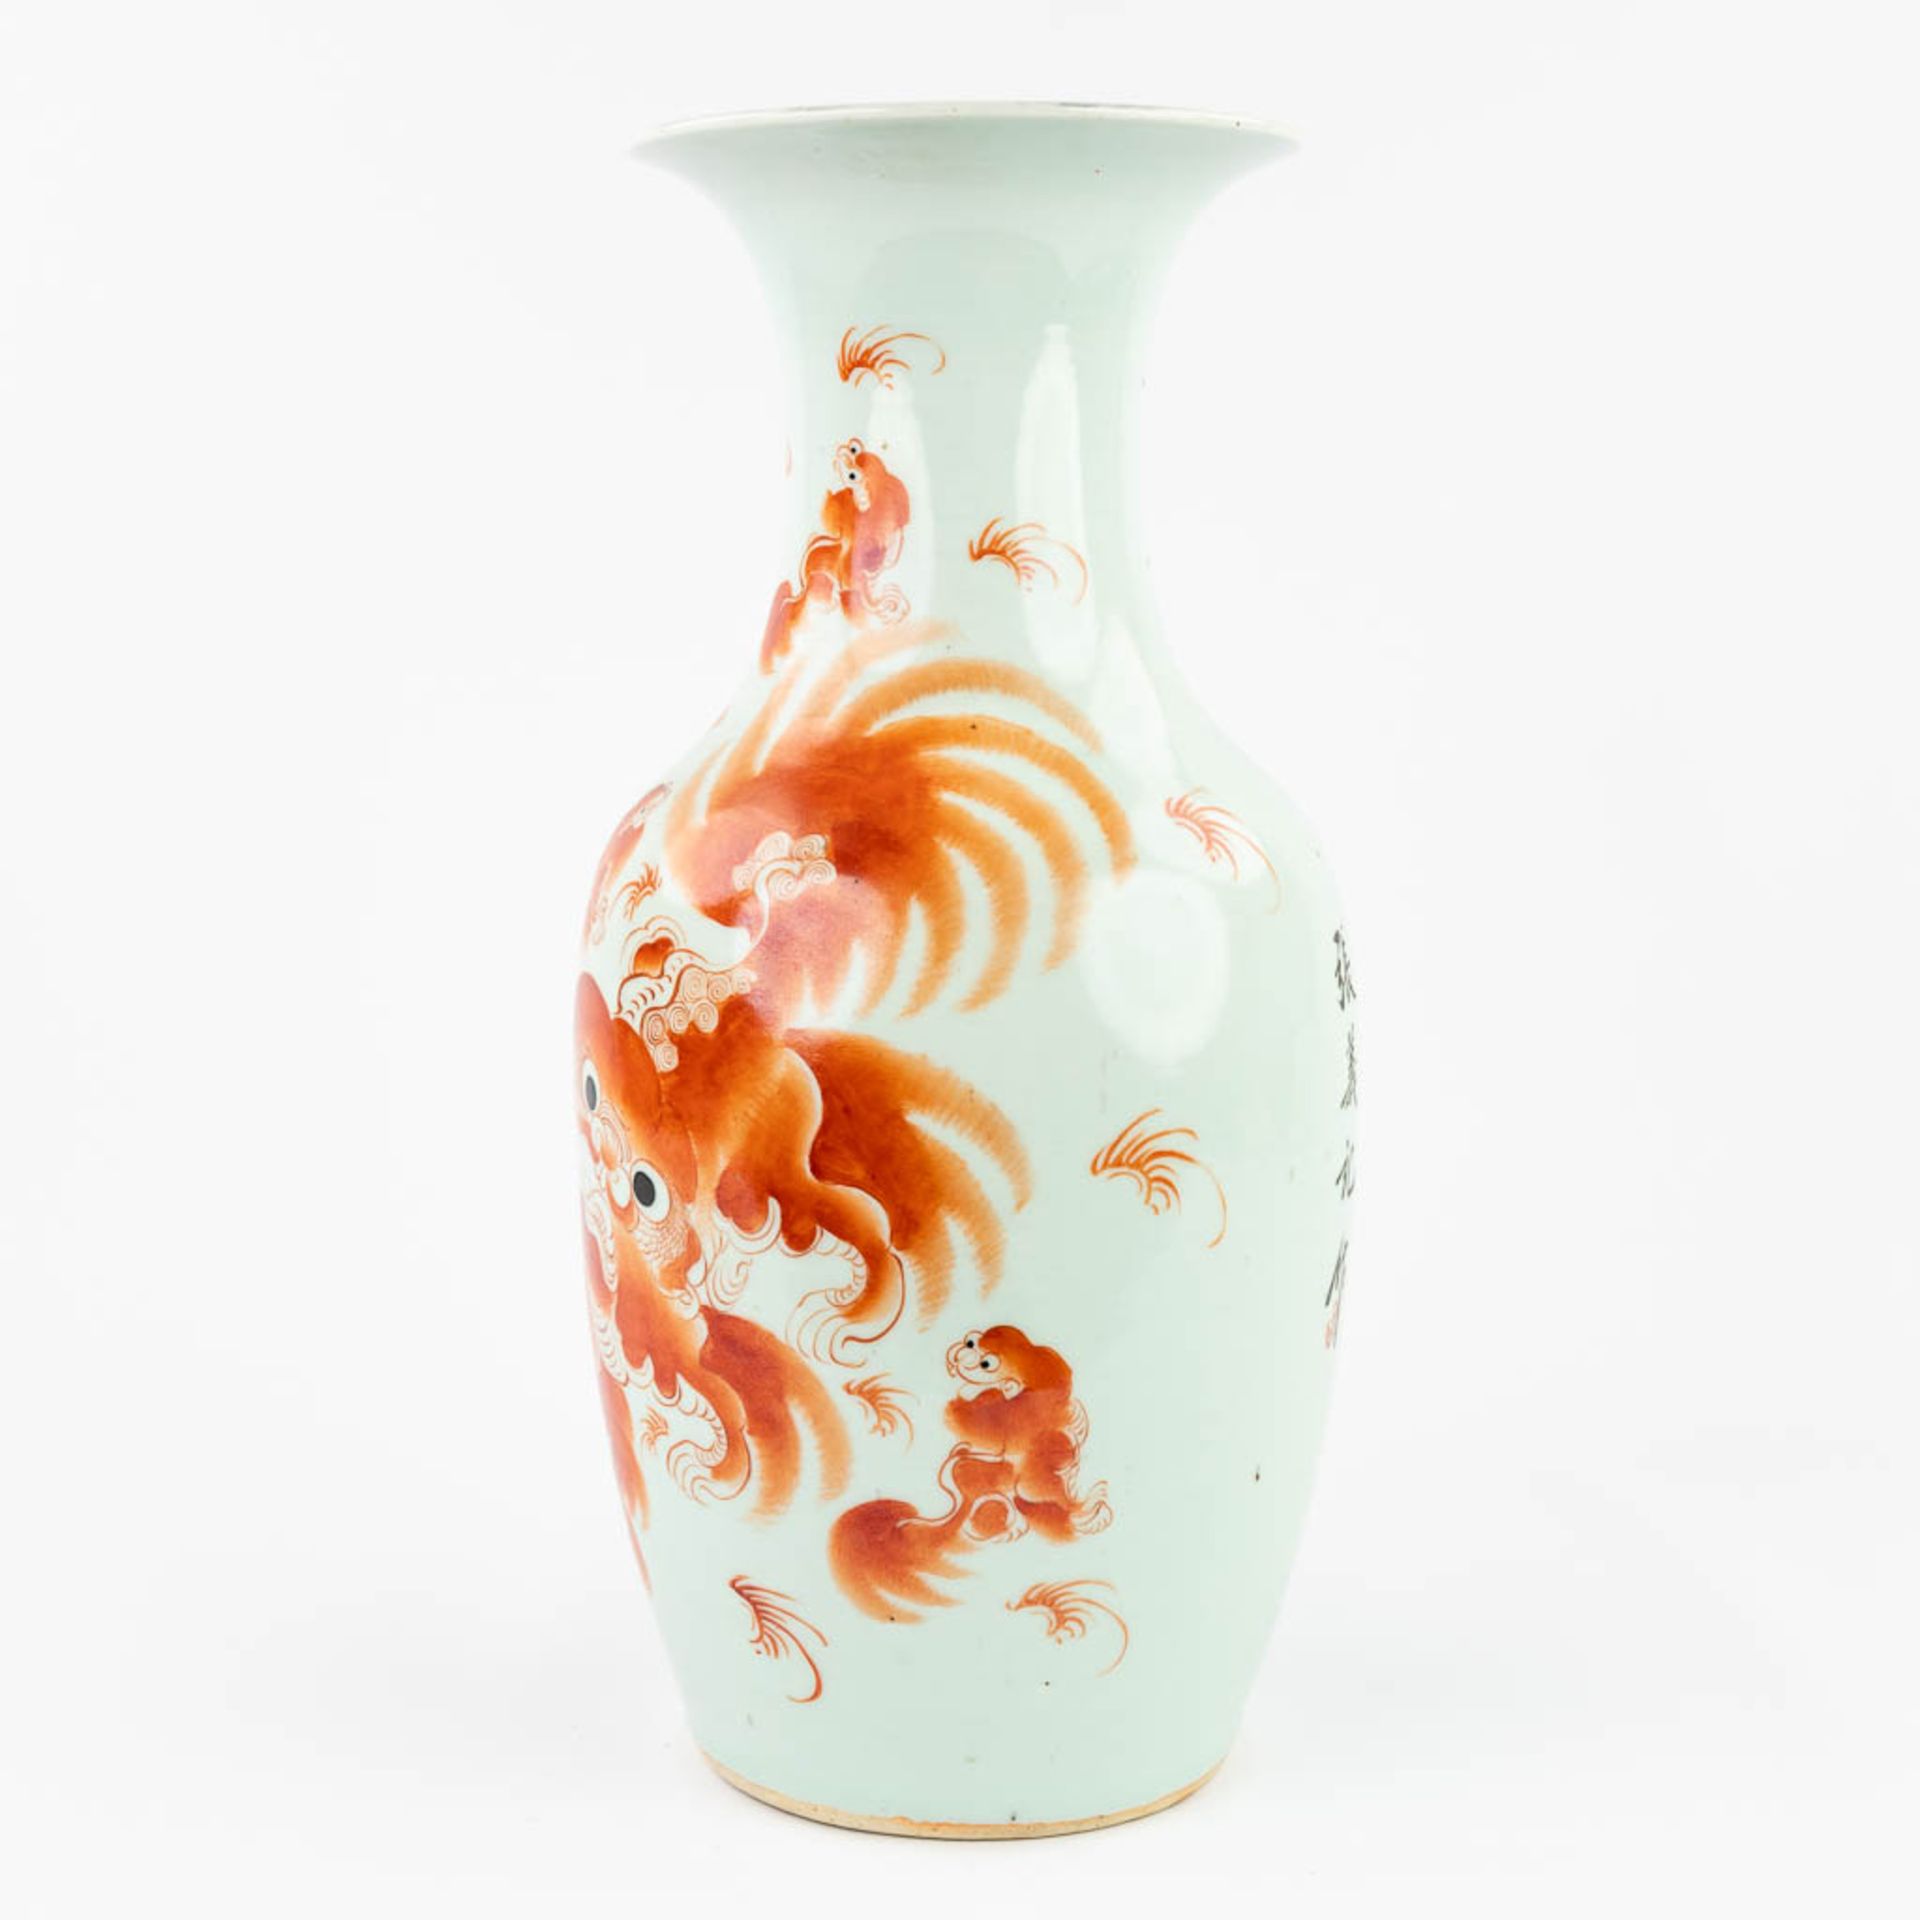 A Chinese vase made of porcelain and decorated with a red foo dog. (44,5 x 21 cm) - Image 11 of 16